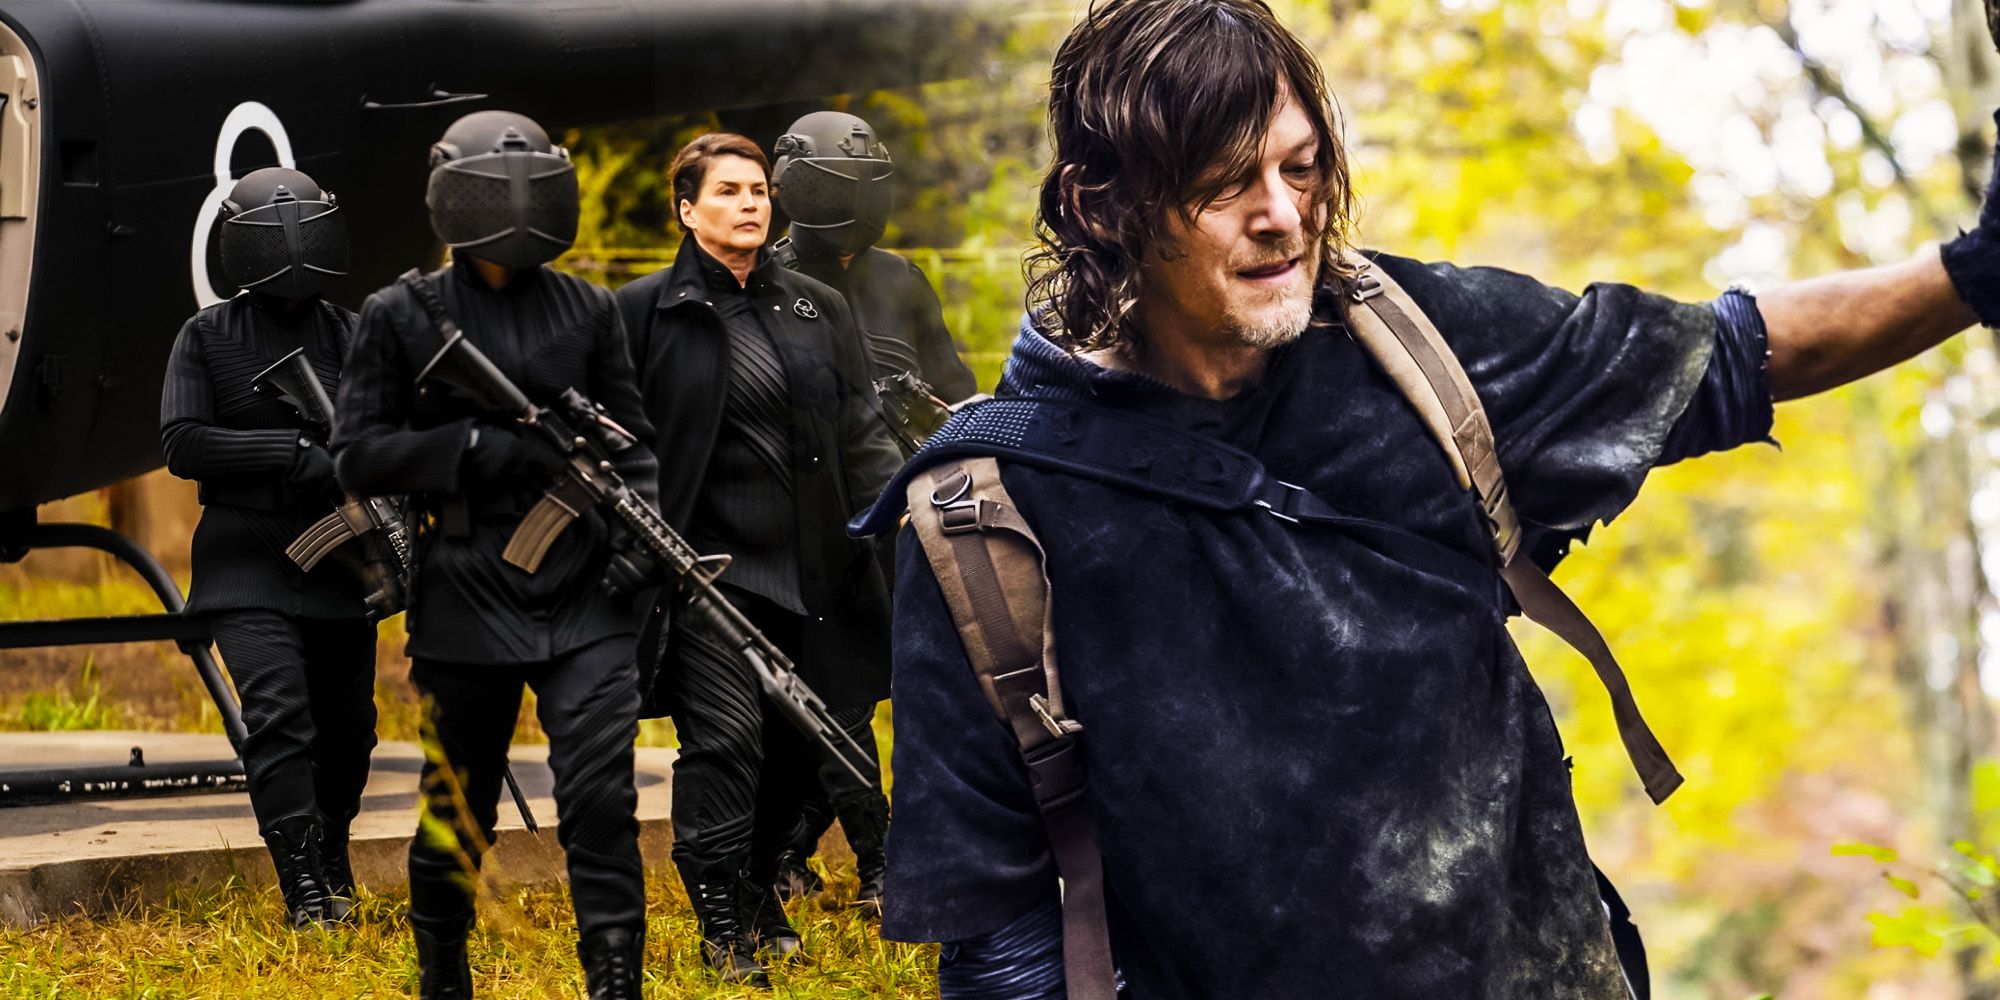 Composite image of Daryl and members of the CRM in The Walking Dead